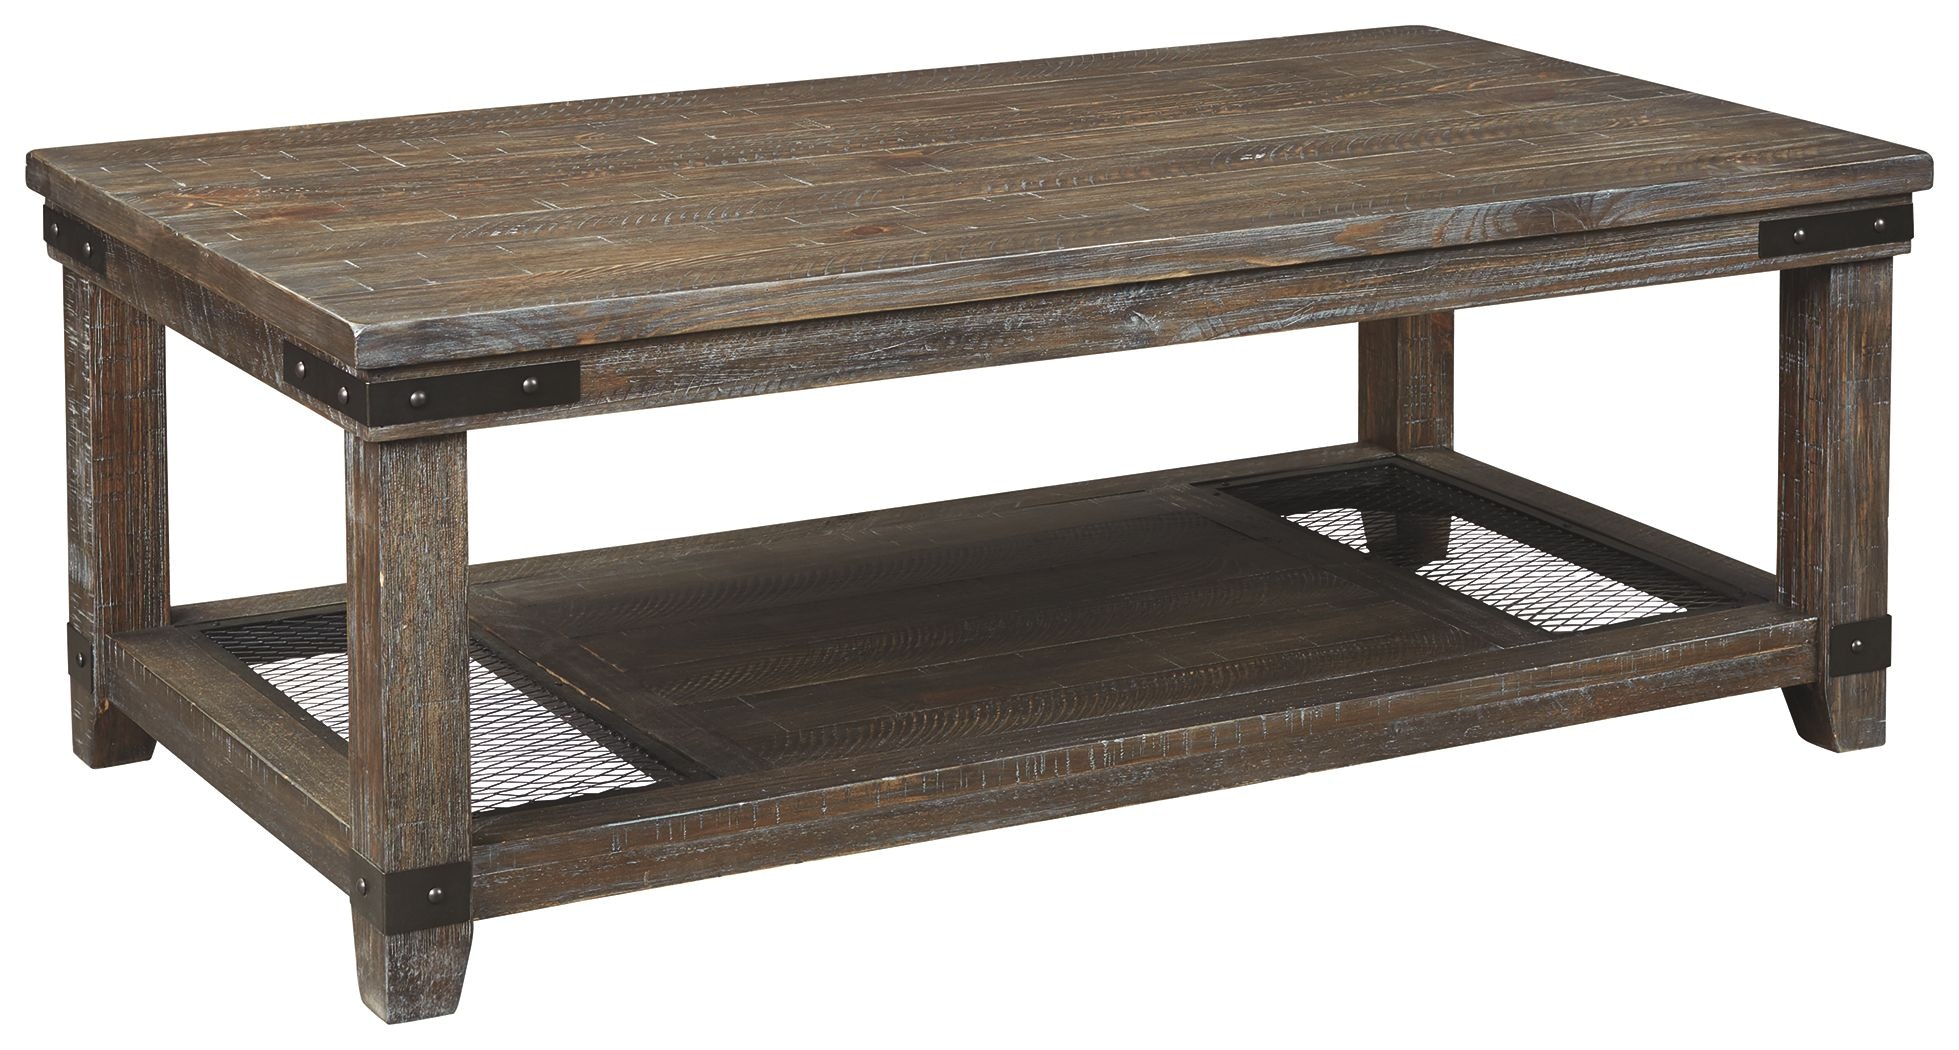 Signature Design by Ashley Living Room Danell Ridge Coffee Table ...